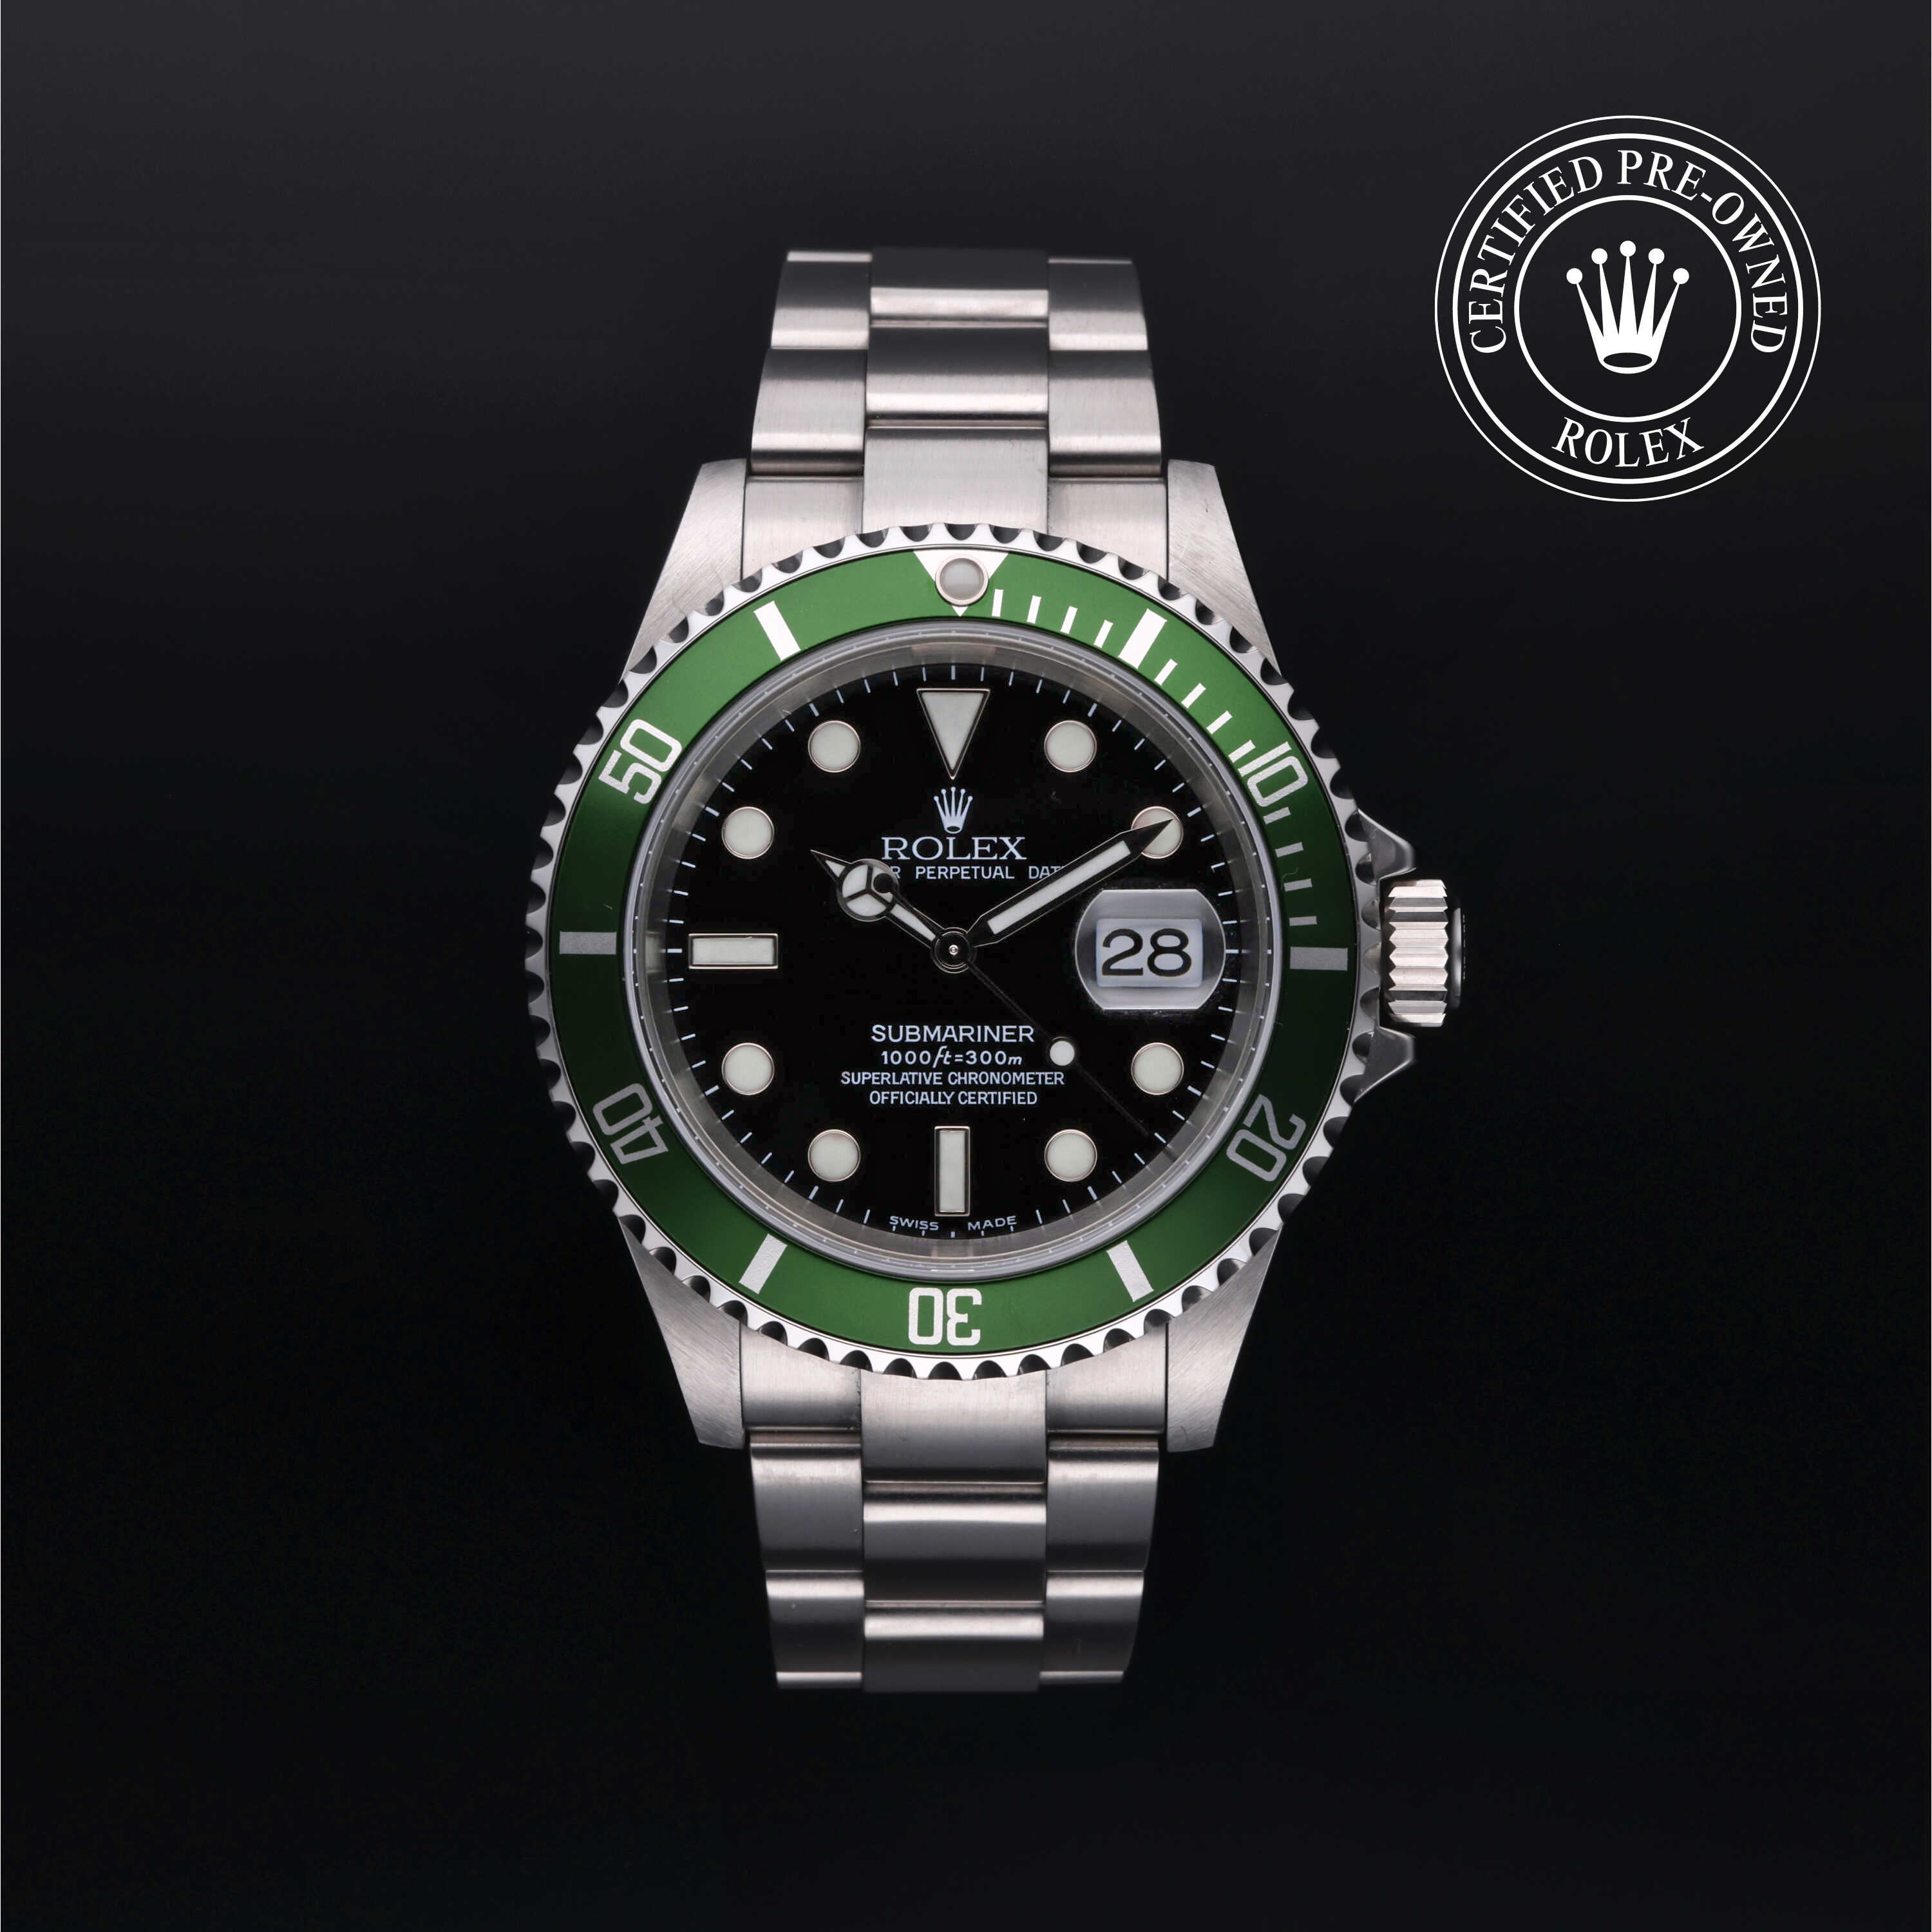 Rolex Submariner in Oystersteel M16610LV-0002 at Kirk Jewelers